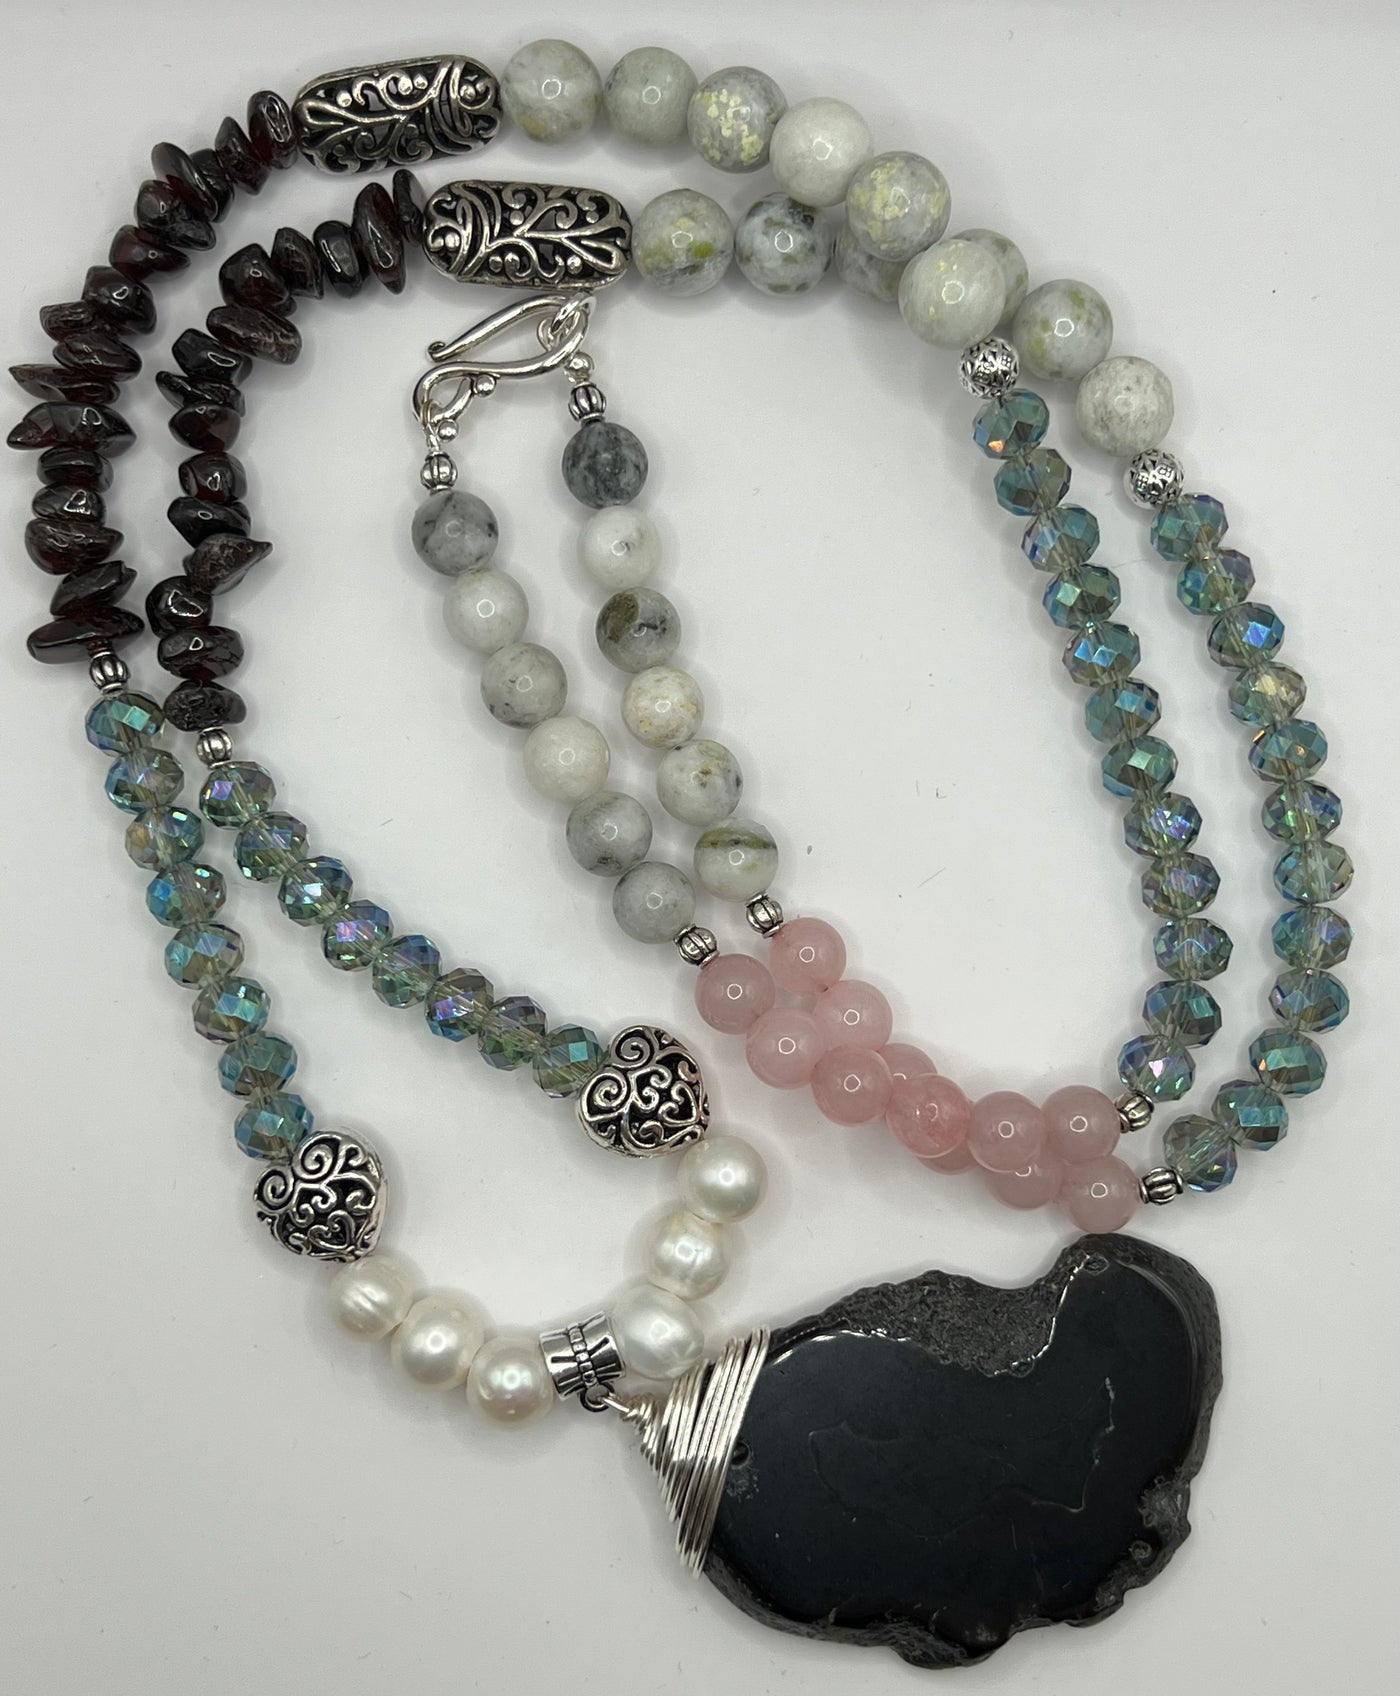 Sumptuous Black Agate Pendant With Fresh Water Pearls- The Nightingale Necklace